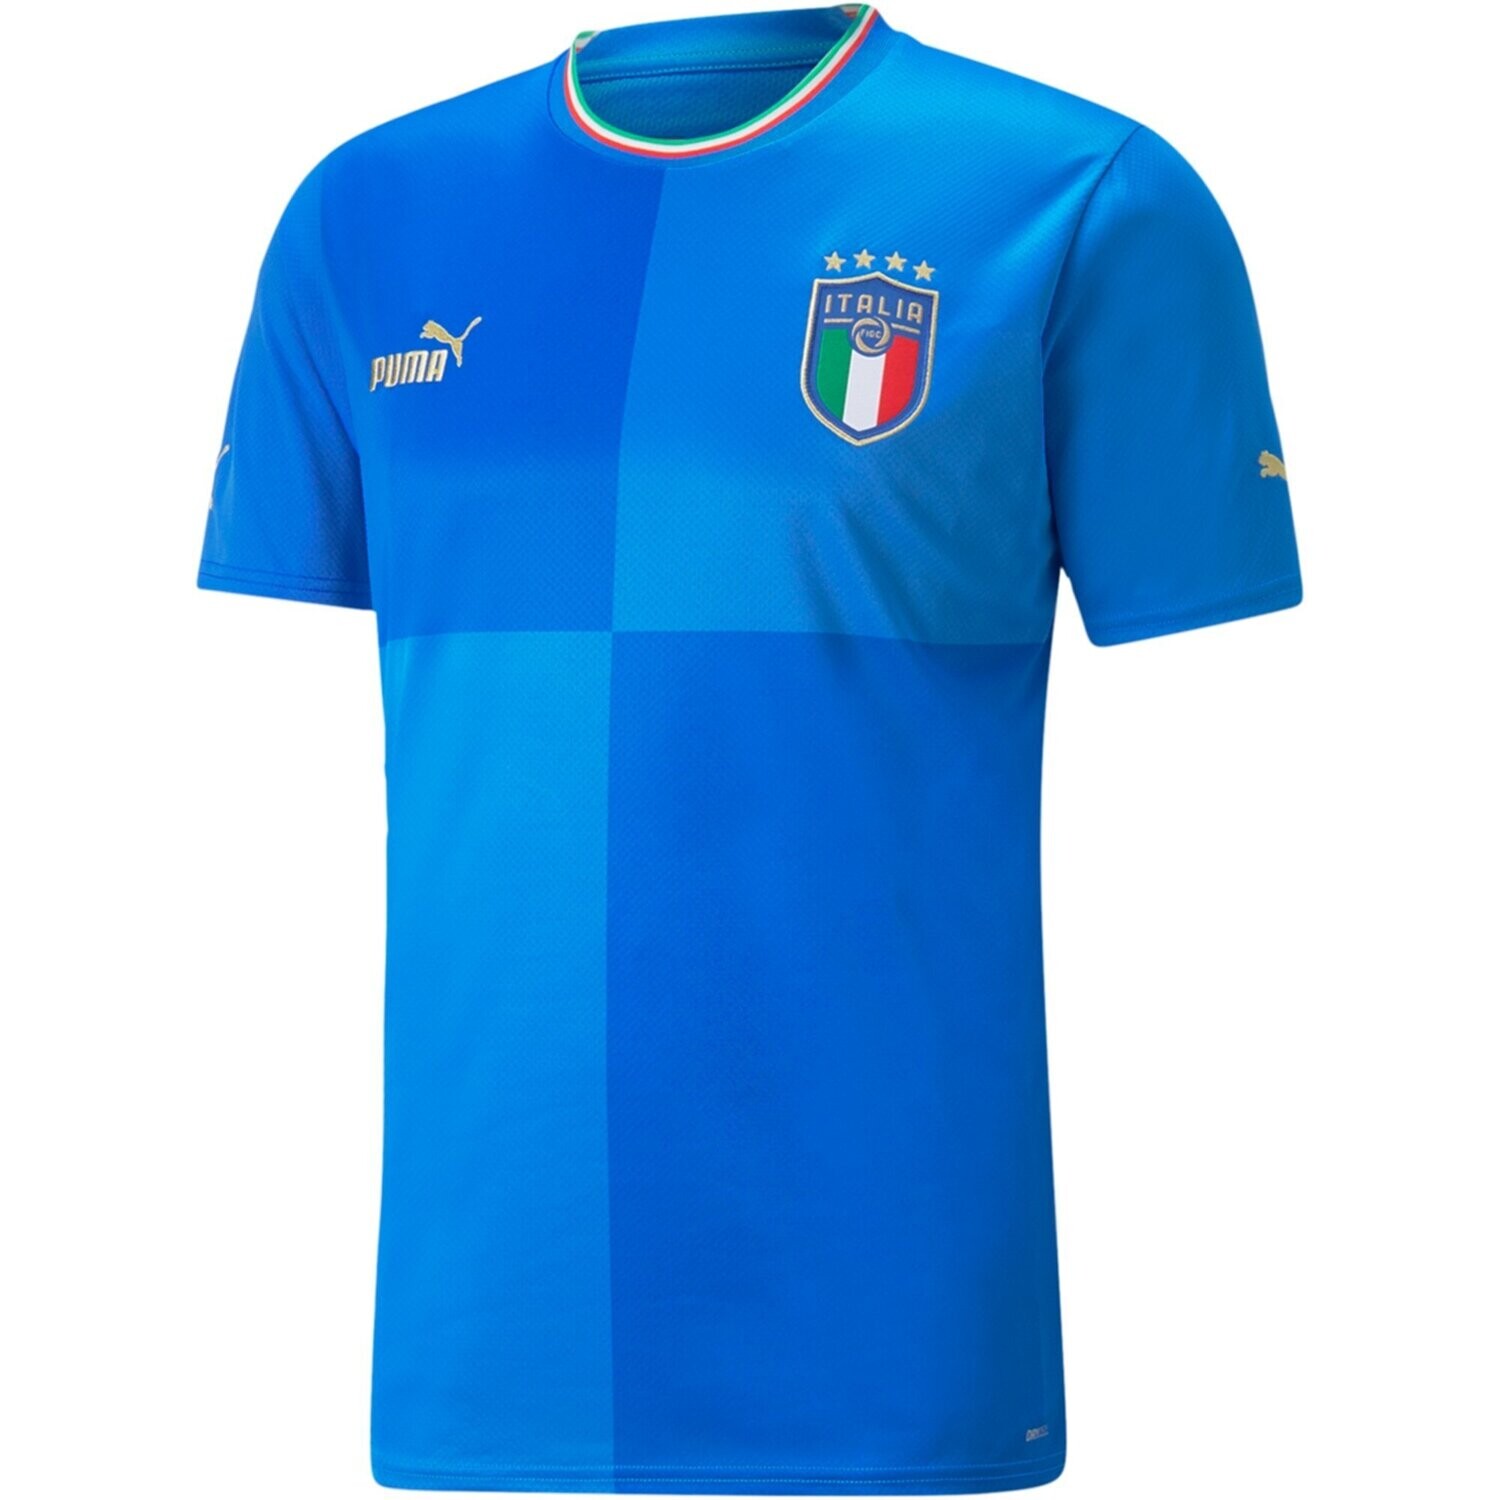 22-23 Italy Home Blue Soccer Jersey Shirt